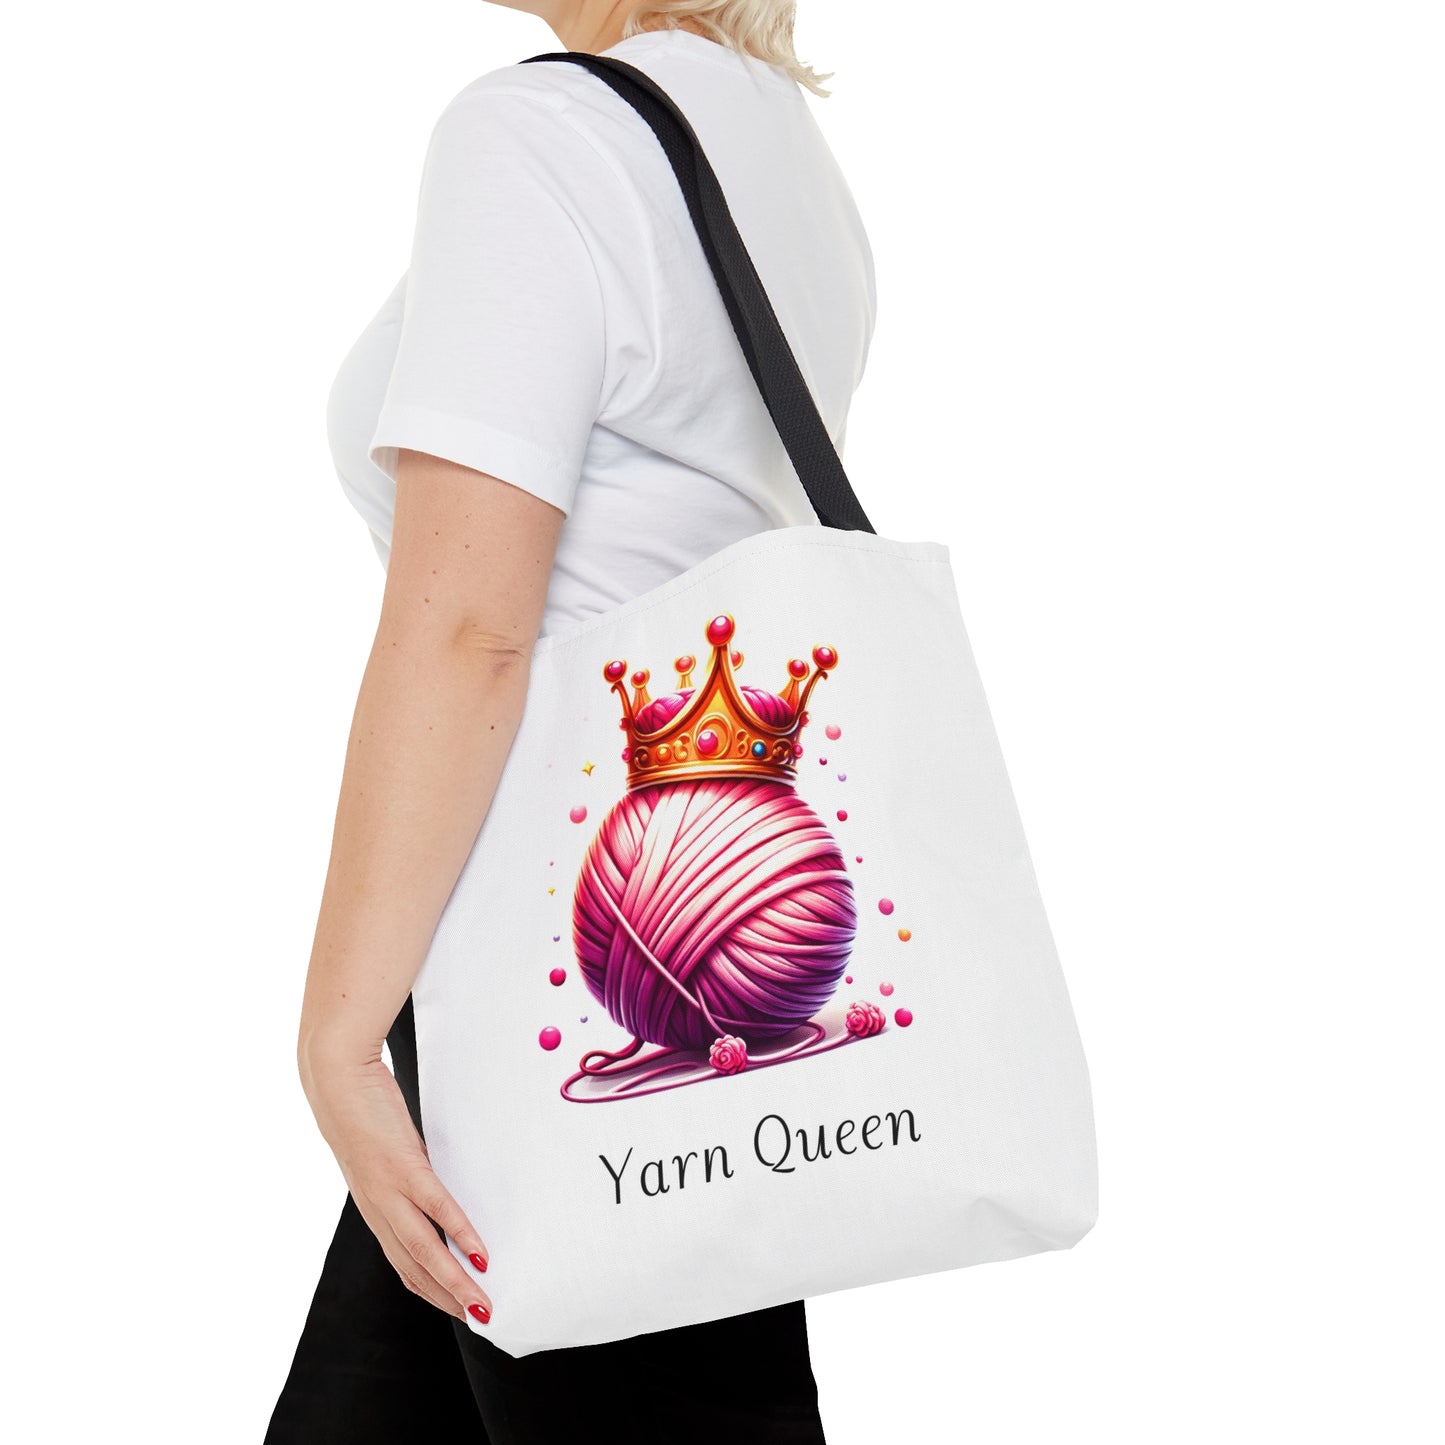 Yarn Queen Tote Bag, Available in 3 Sizes